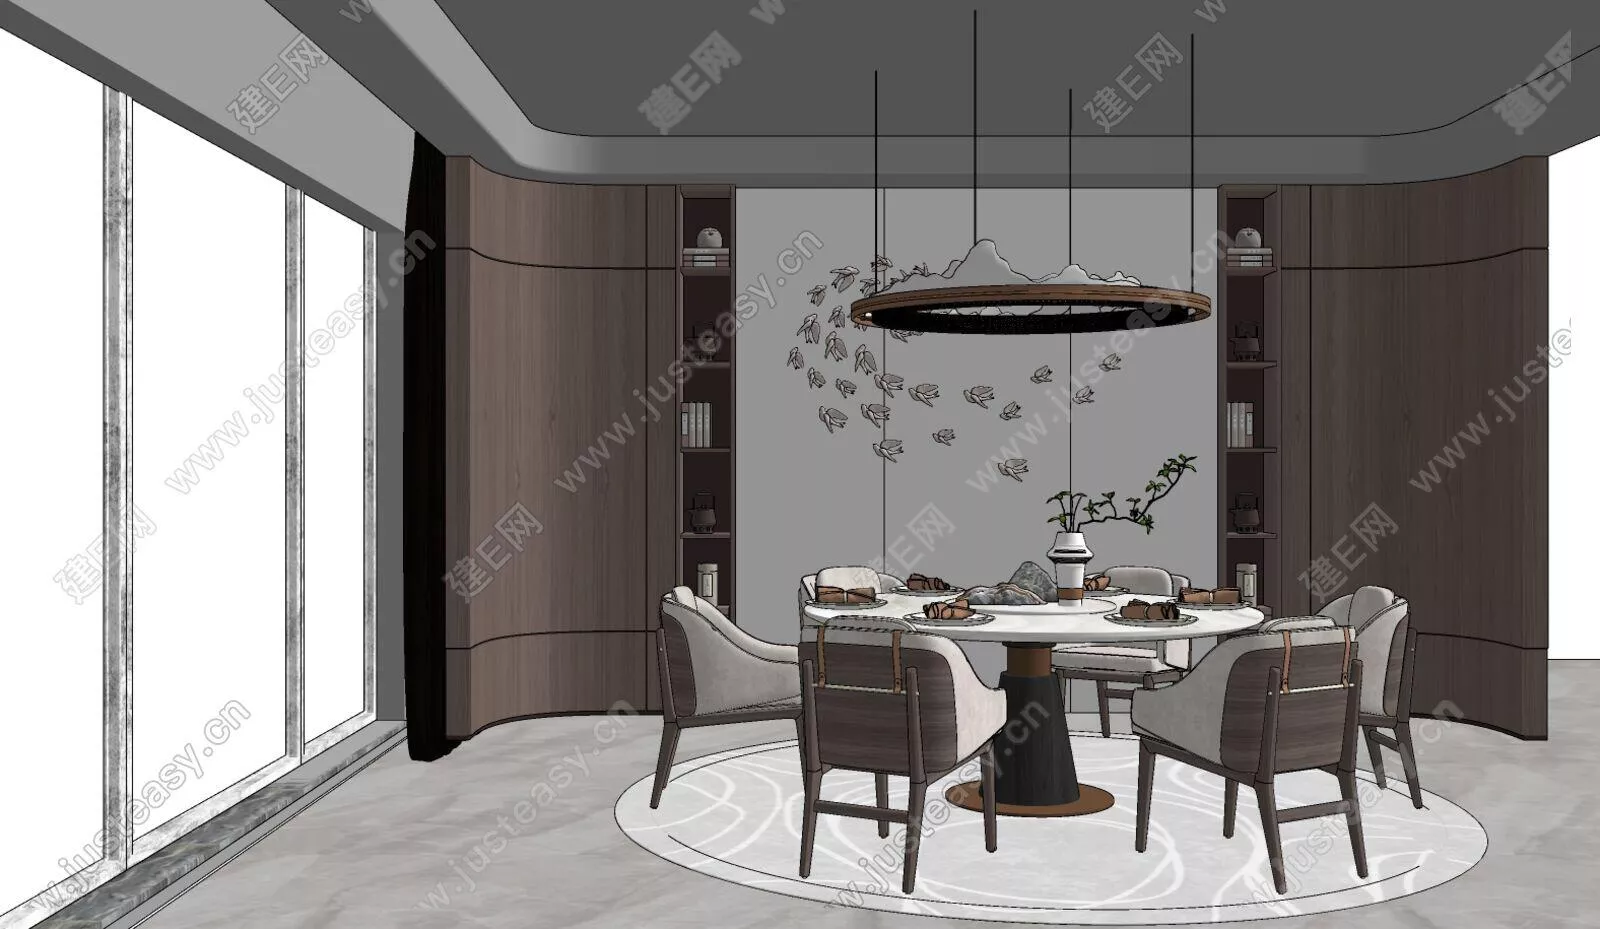 CHINESE DINING ROOM - SKETCHUP 3D SCENE - ENSCAPE - 109462816